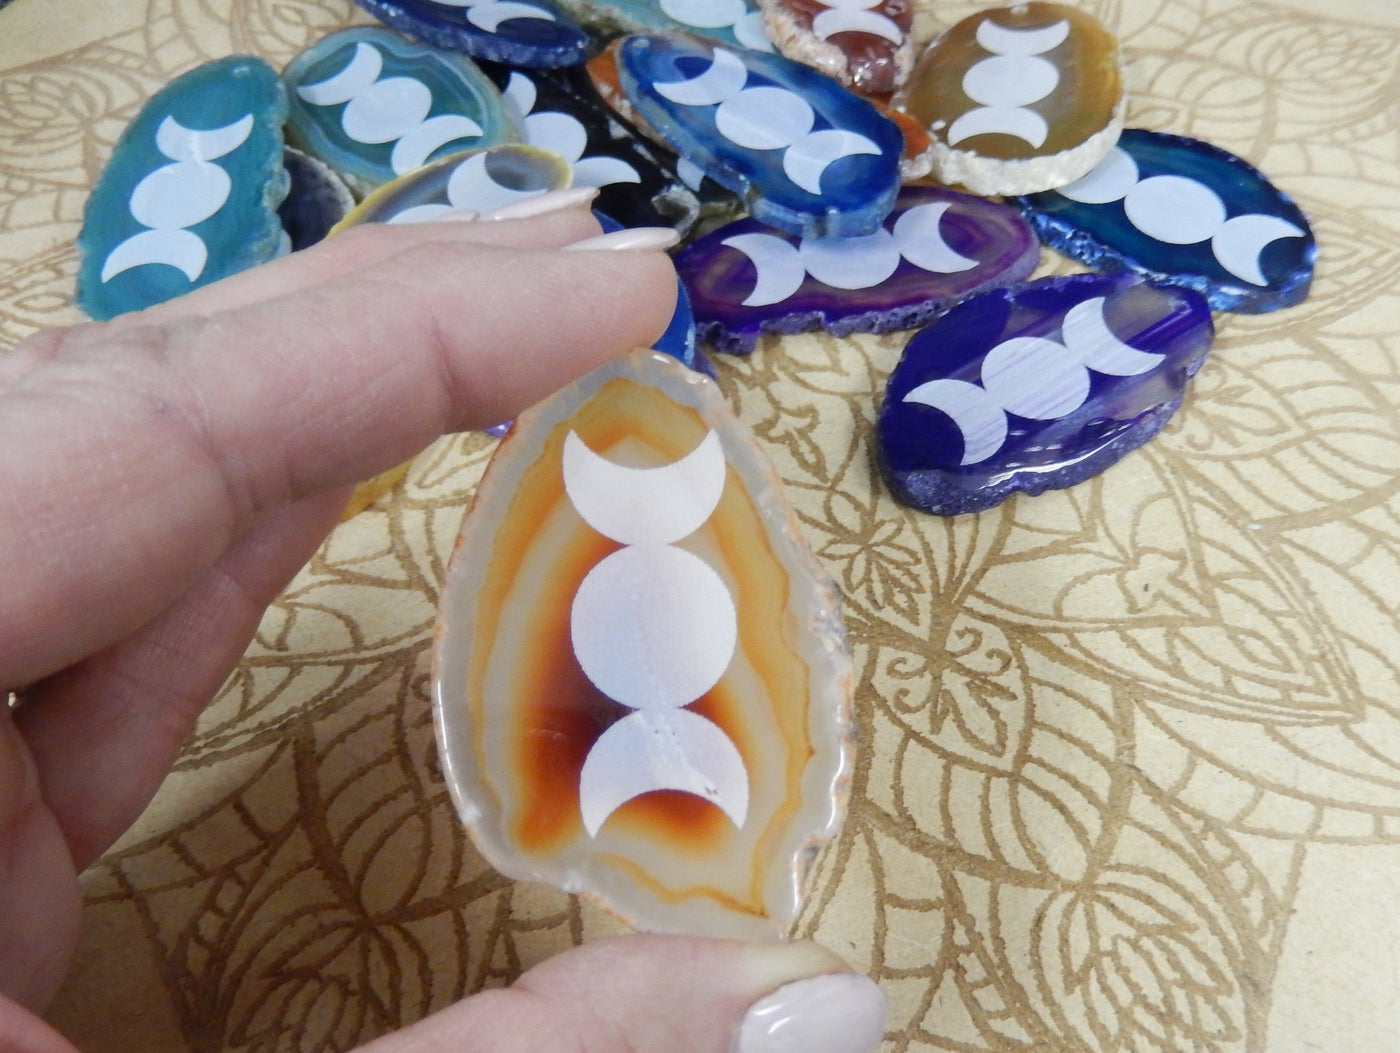 This picture is showing one of our natural agate slices being held for size reference.